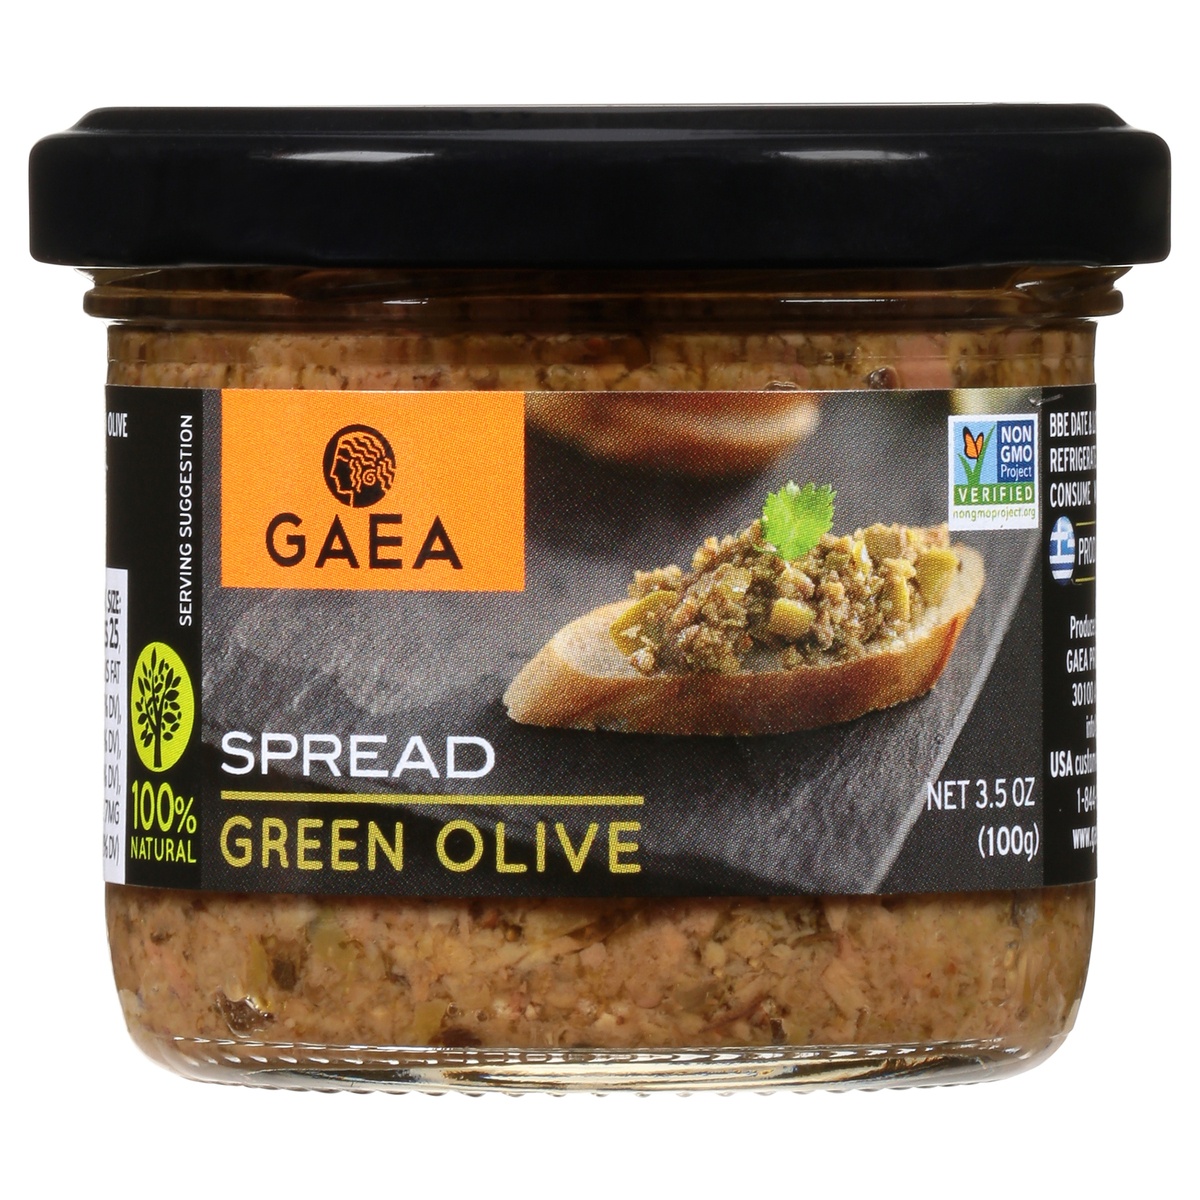 slide 1 of 3, Gaea Cat Coras Kitchen Green Olive Tapenade with Lemon and Basil, 3.5 oz